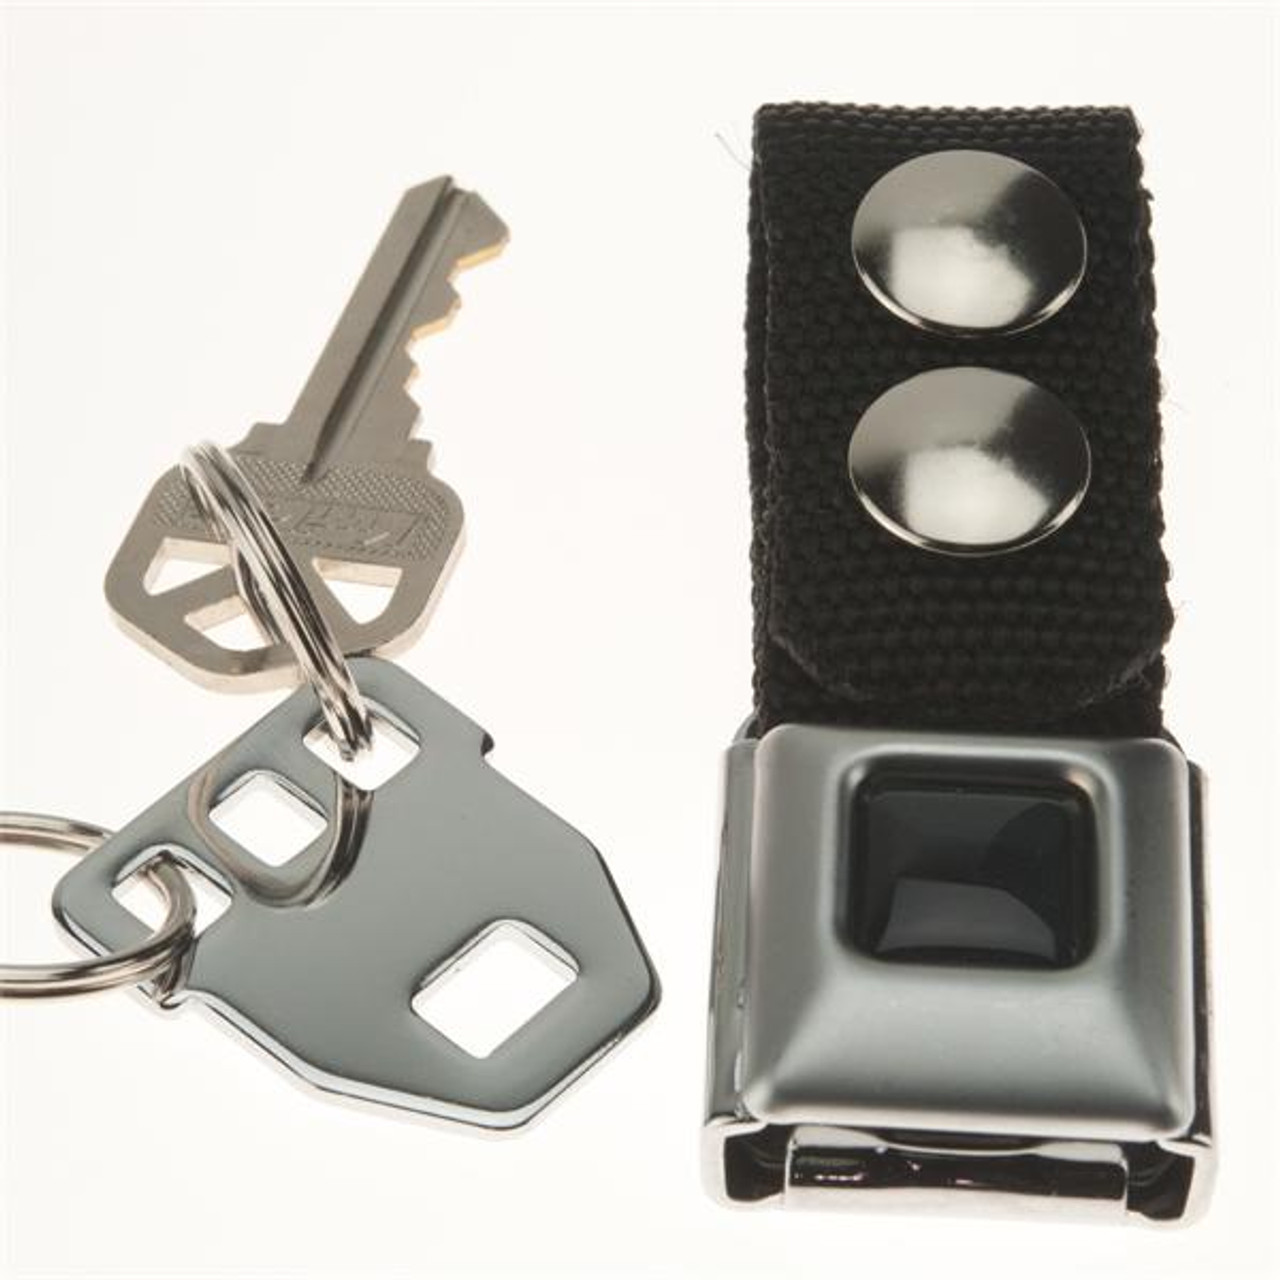 Nylon Strap with Small Seat Belt Buckle Key Holder